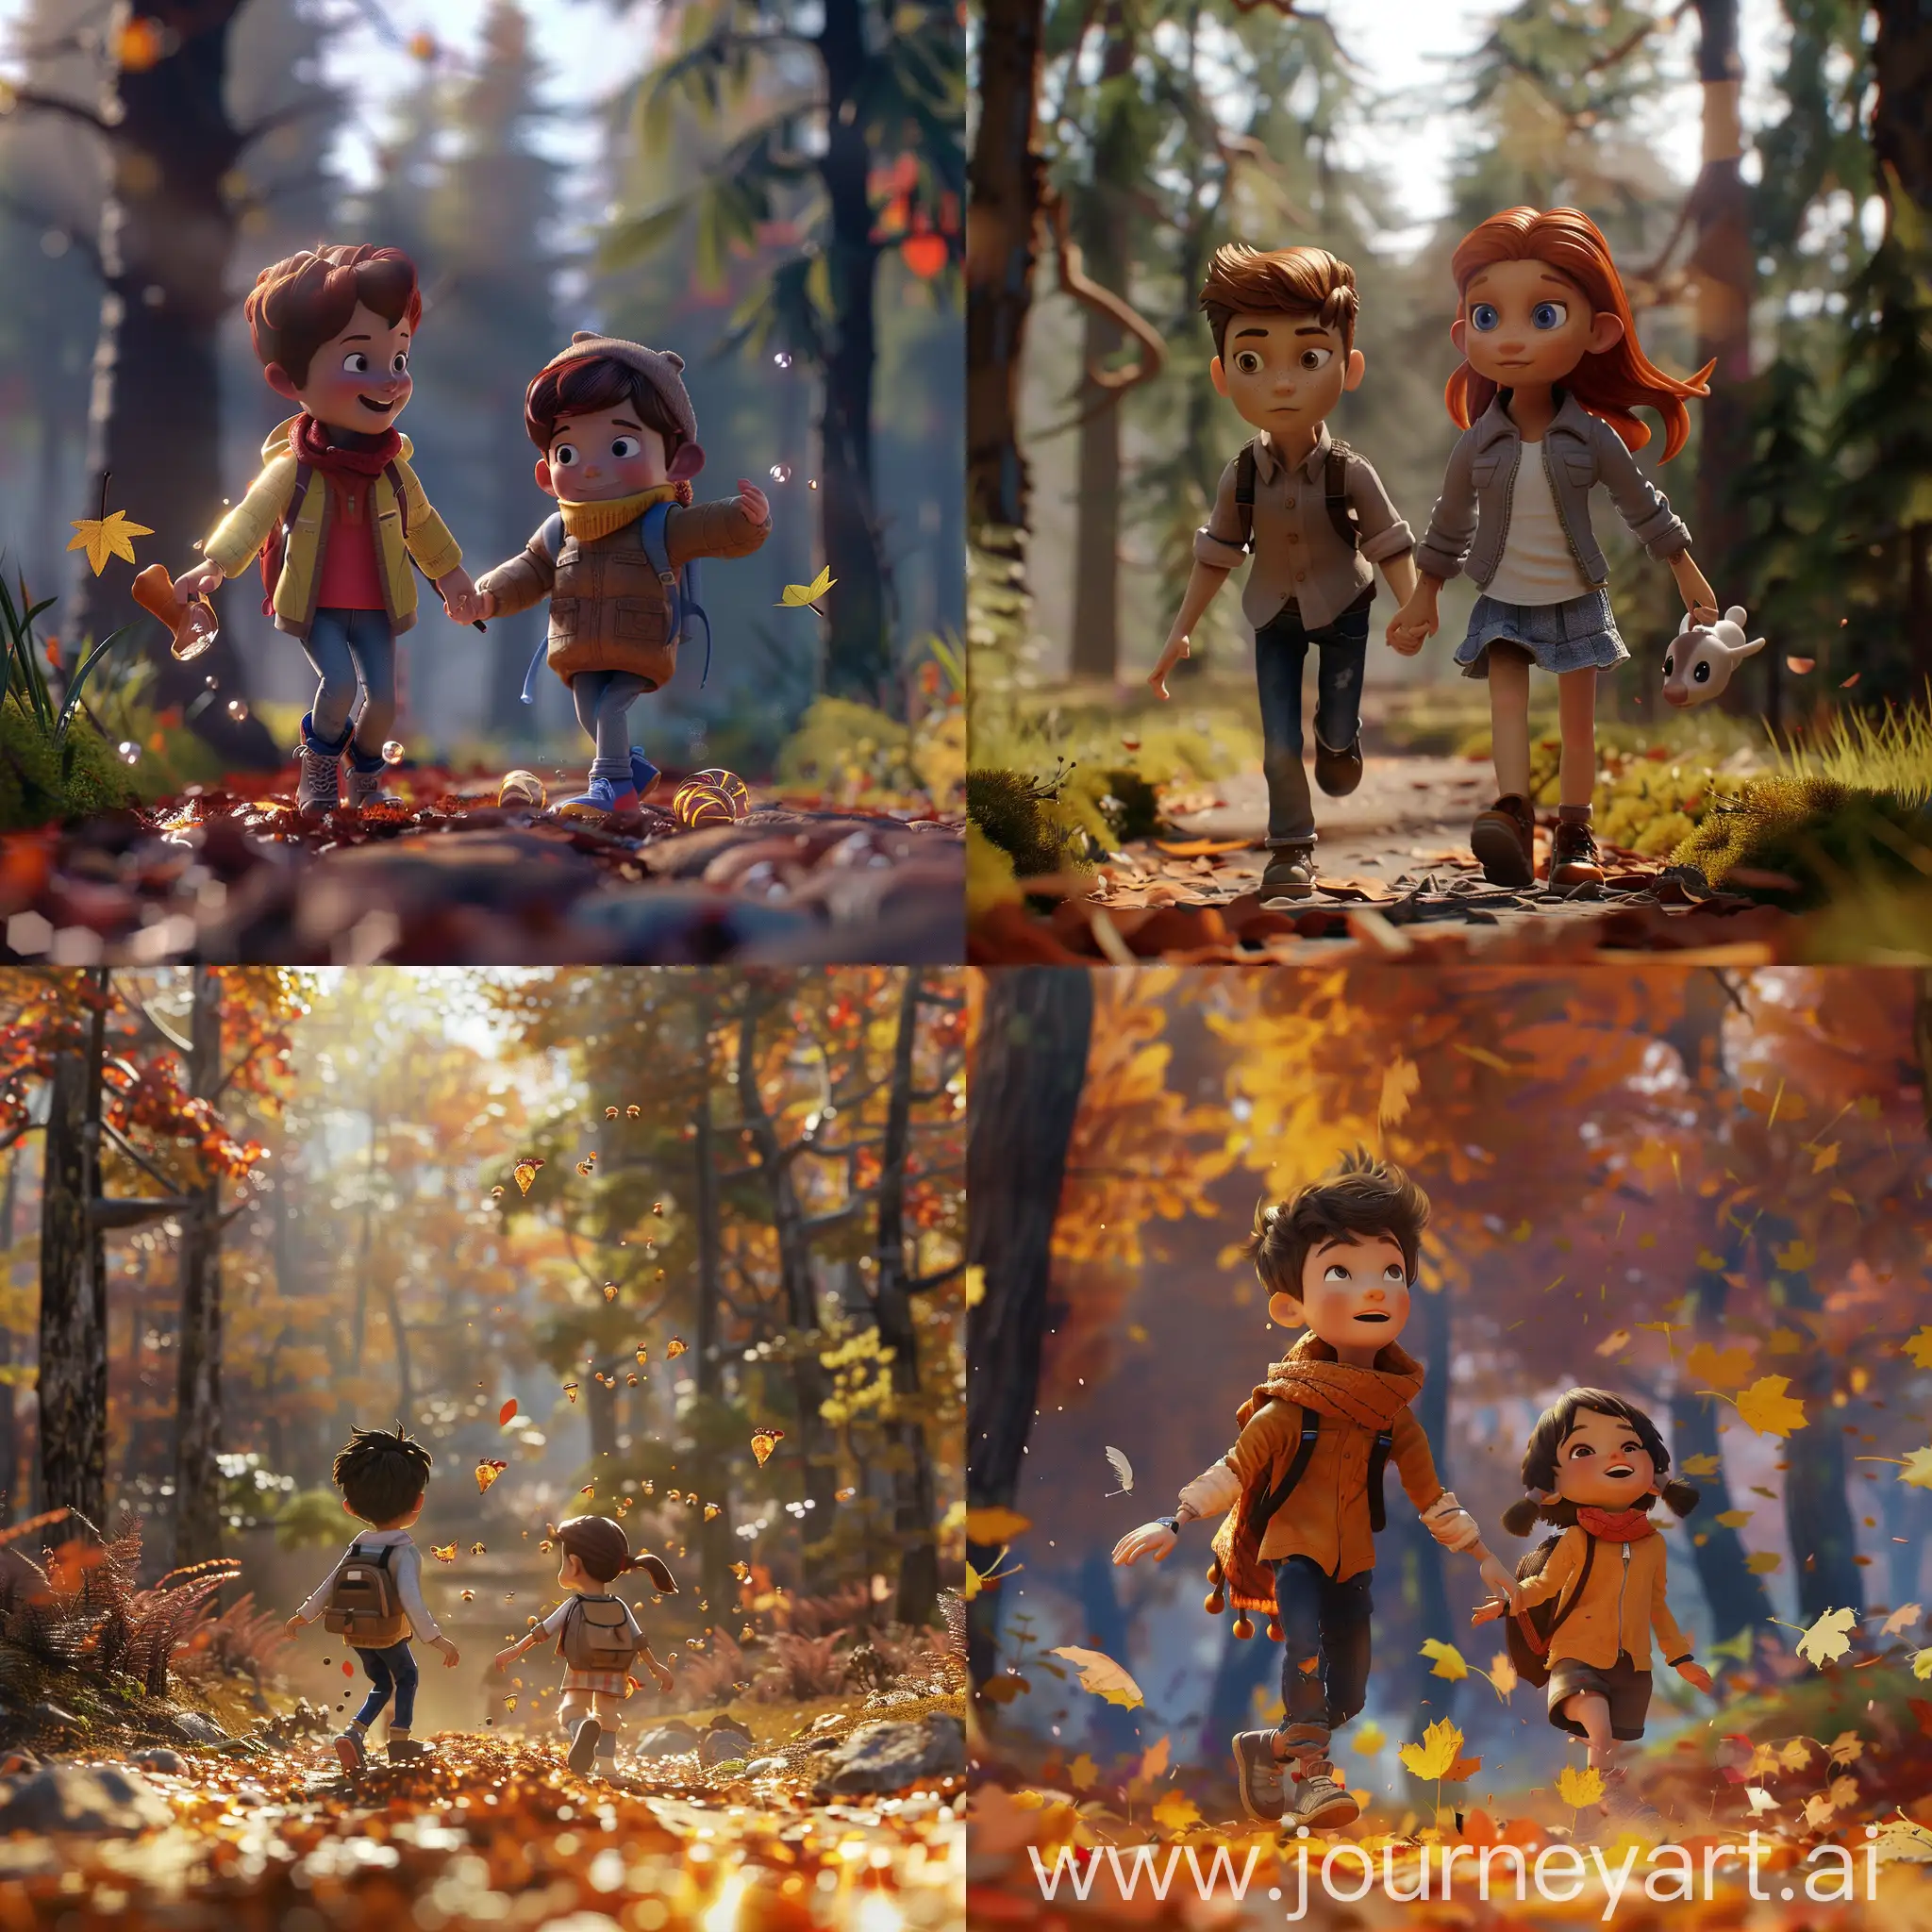 Children-Exploring-Woods-and-Playing-with-Caramel-Candies